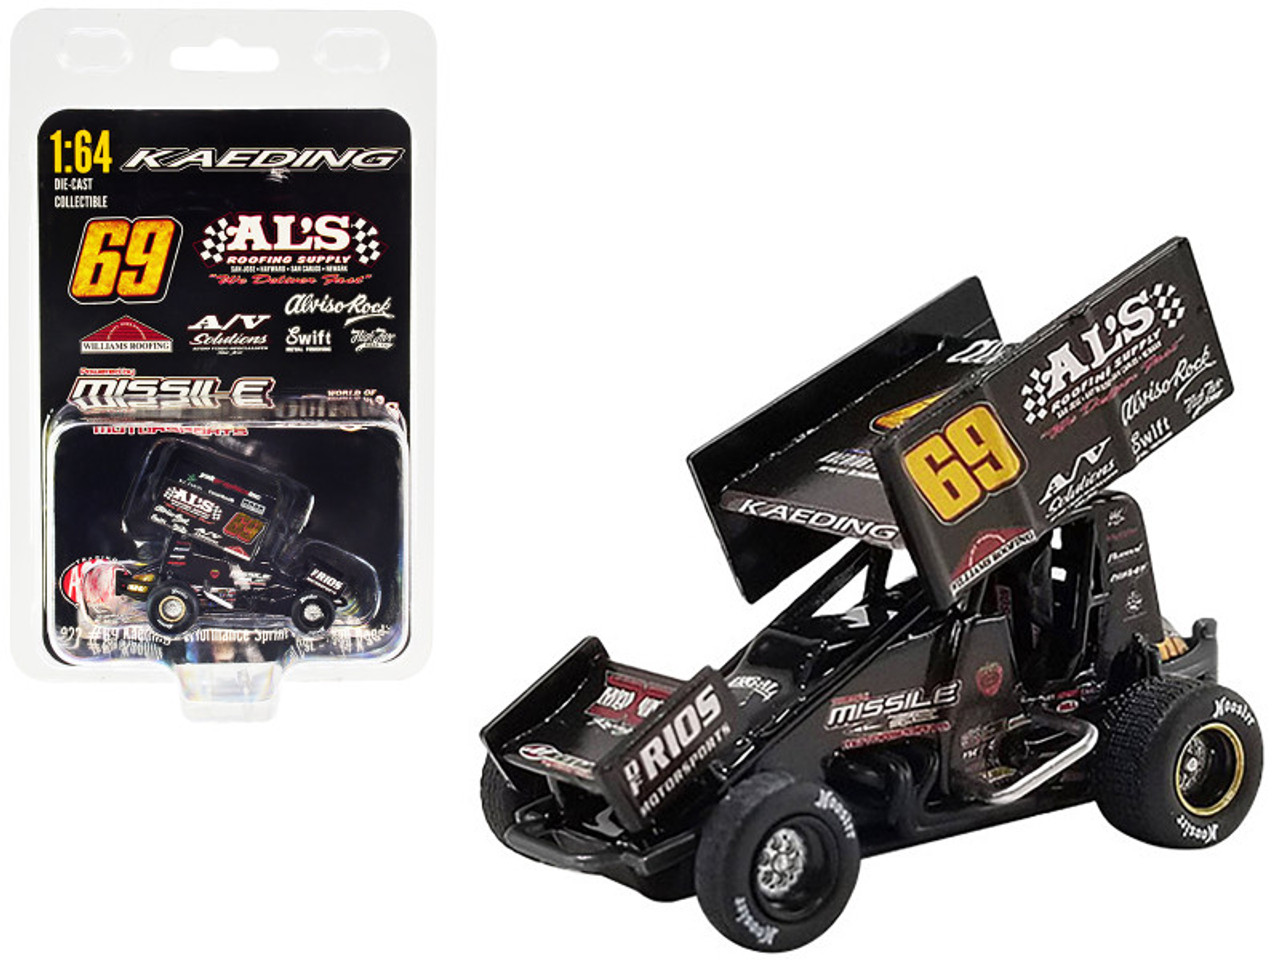 Winged Sprint Car #69 Bud Kaeding "Al's Roofing Supplies" Kaeding Performance "World of Outlaws" (2022) 1/64 Diecast Model Car by ACME